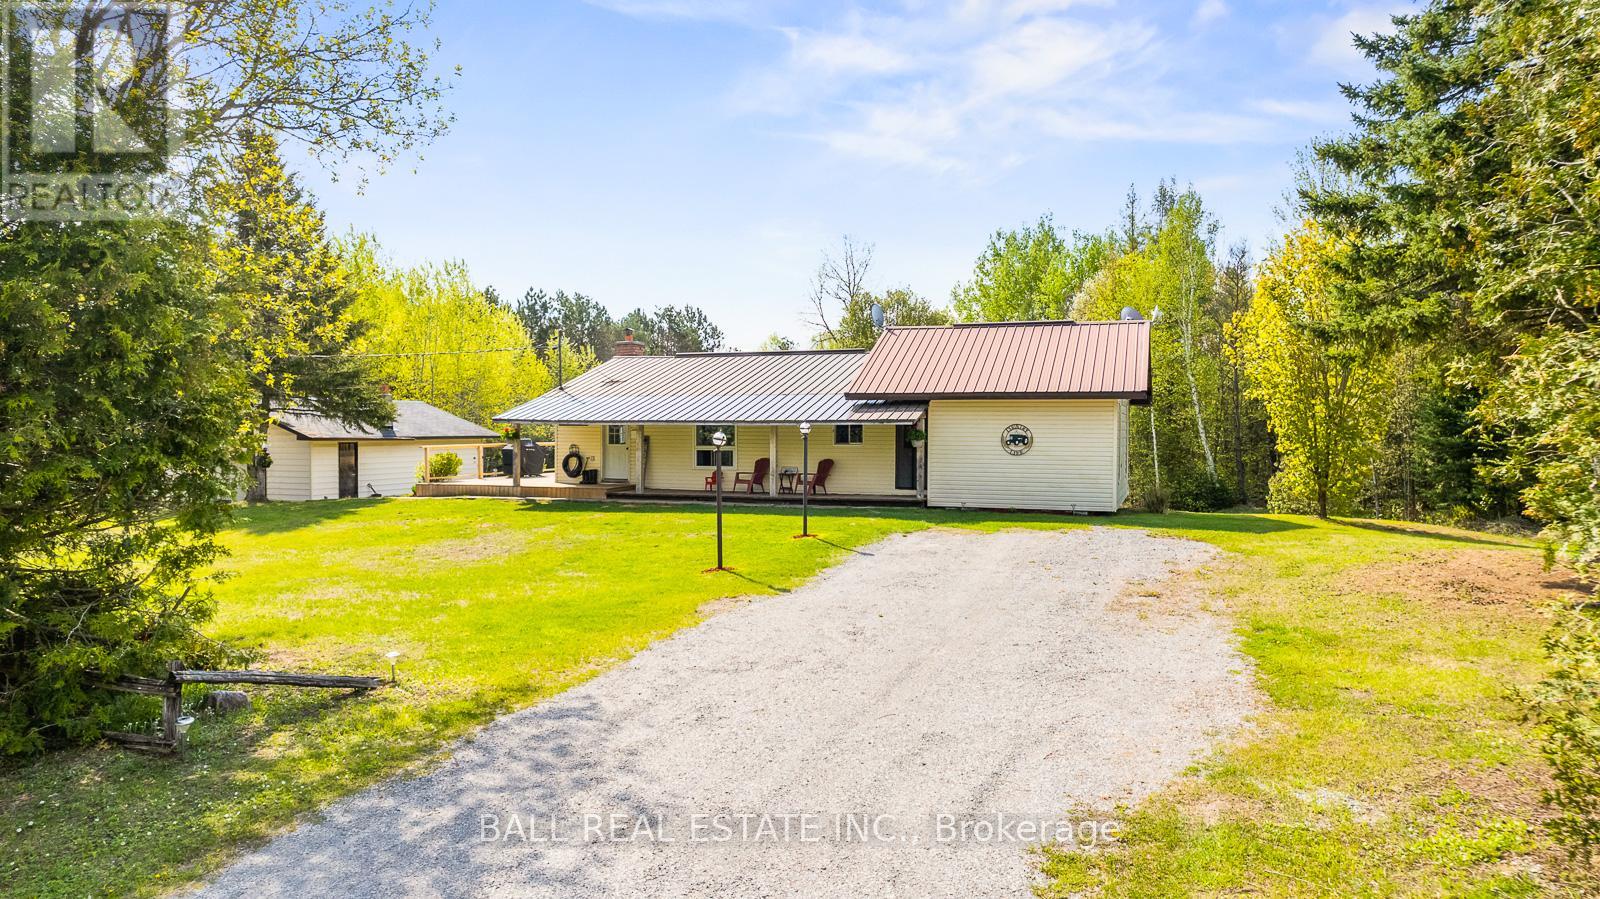 172 GALWAY ROAD, galway-cavendish and harvey, Ontario